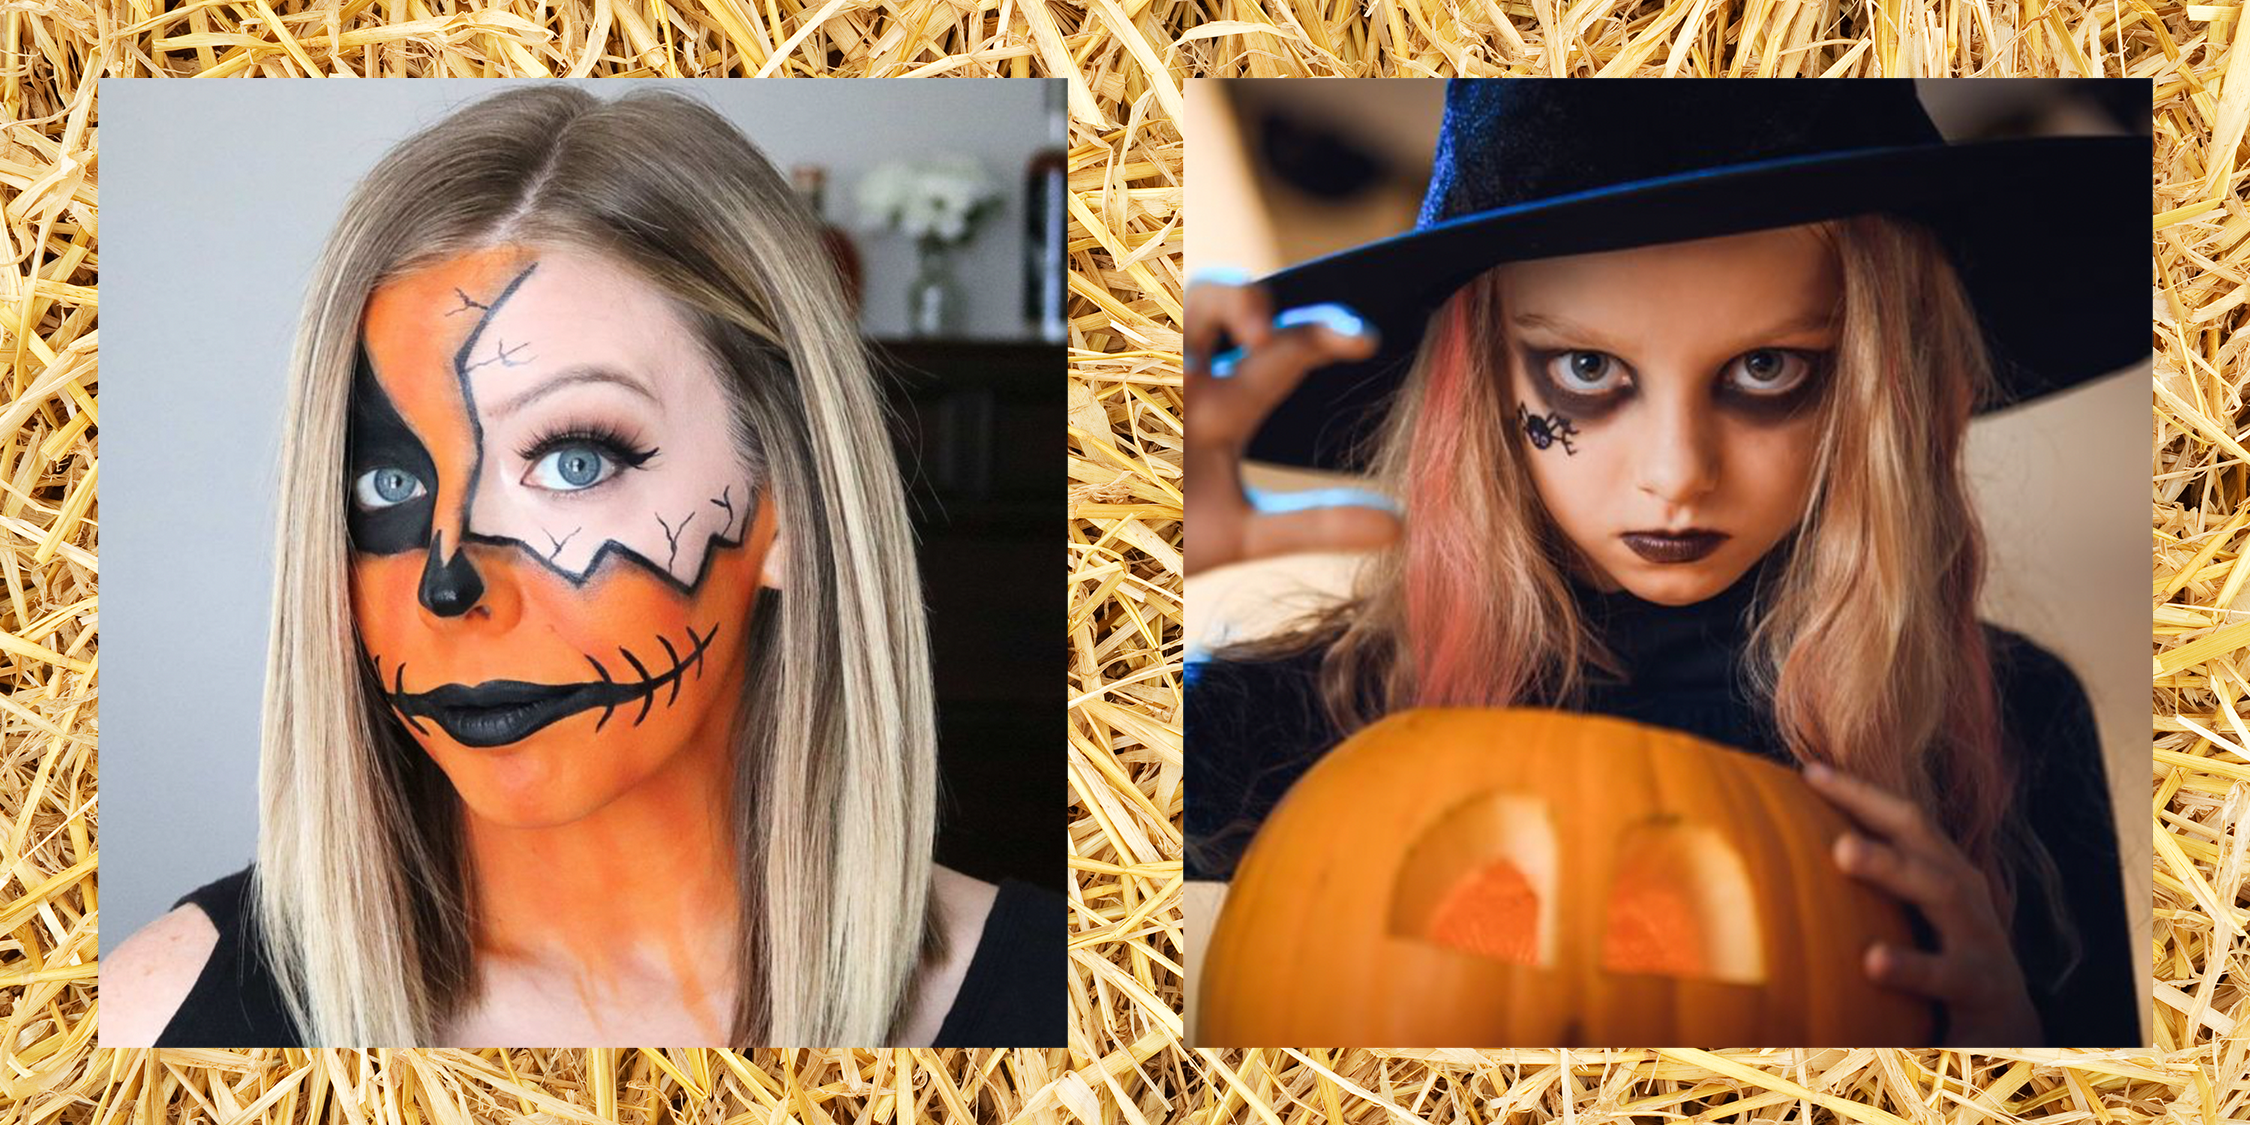 Amazing Halloween Zombie Face Paint Tutorial: Step by Step